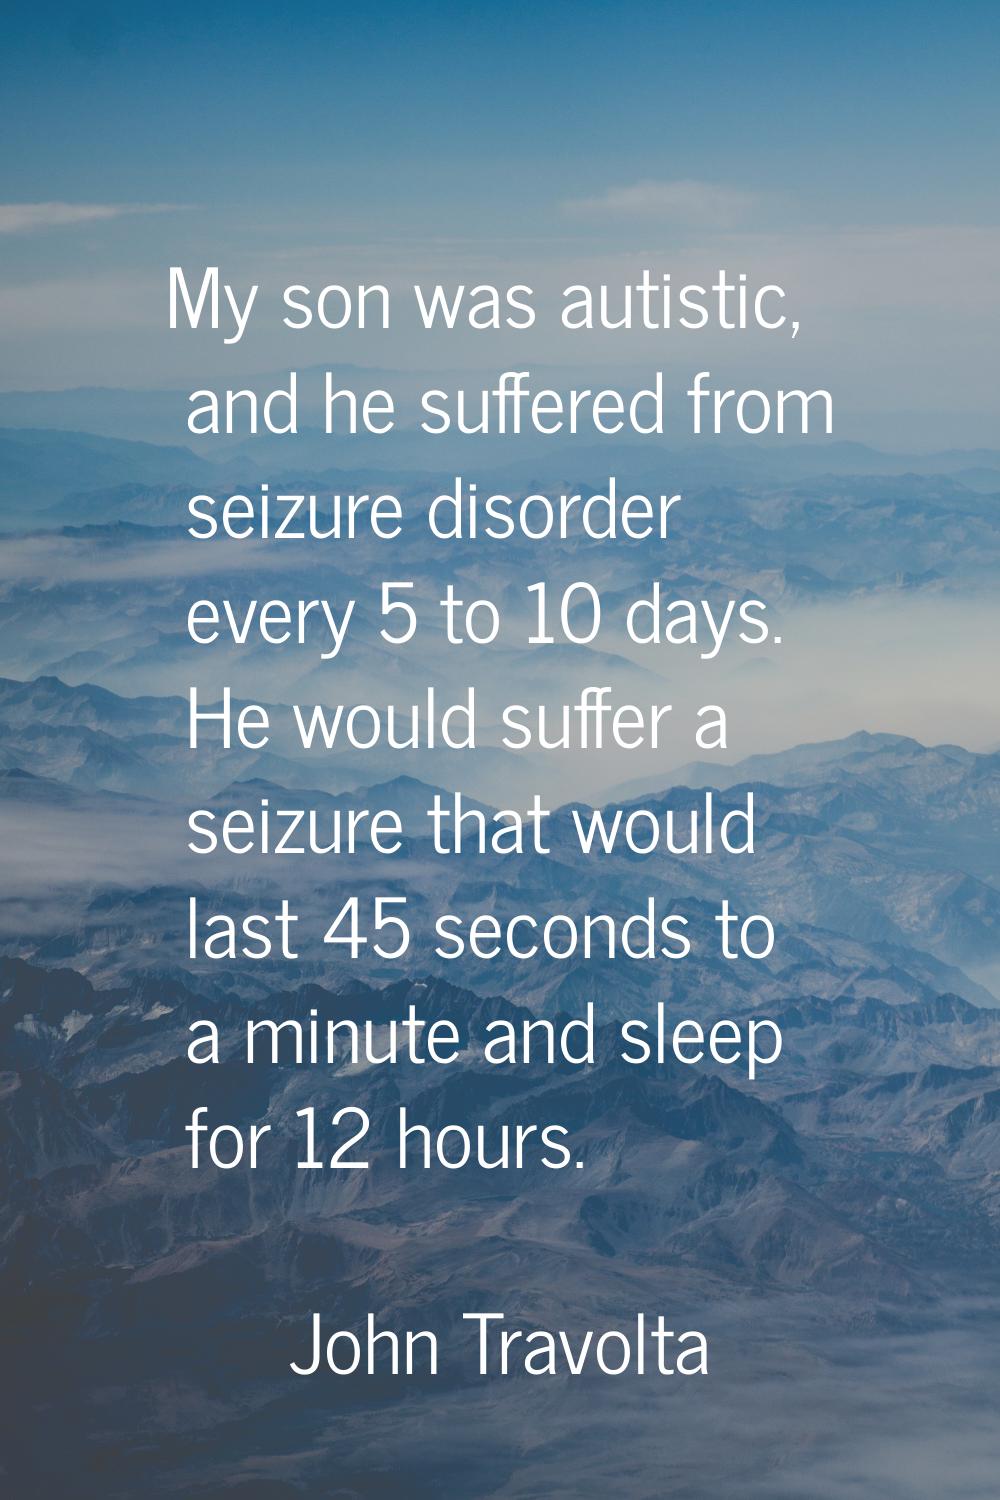 My son was autistic, and he suffered from seizure disorder every 5 to 10 days. He would suffer a se